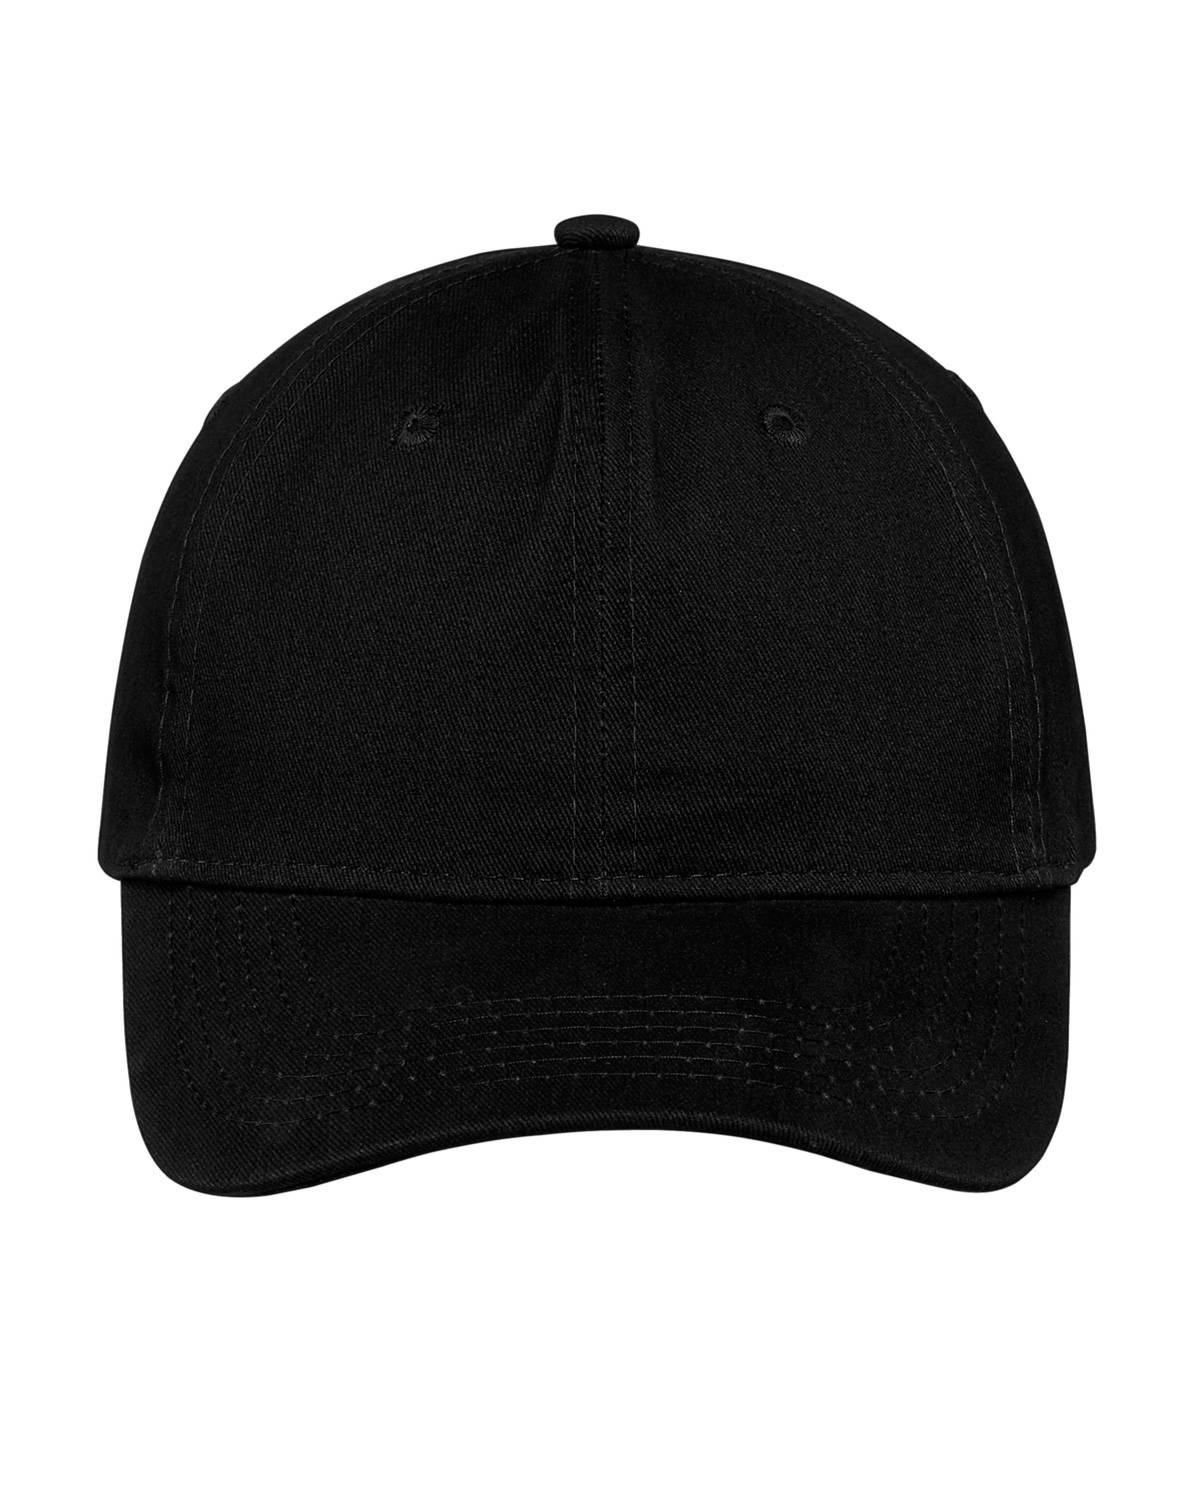 Buy Port & Company CP77 Brushed Twill Low Profile Cap